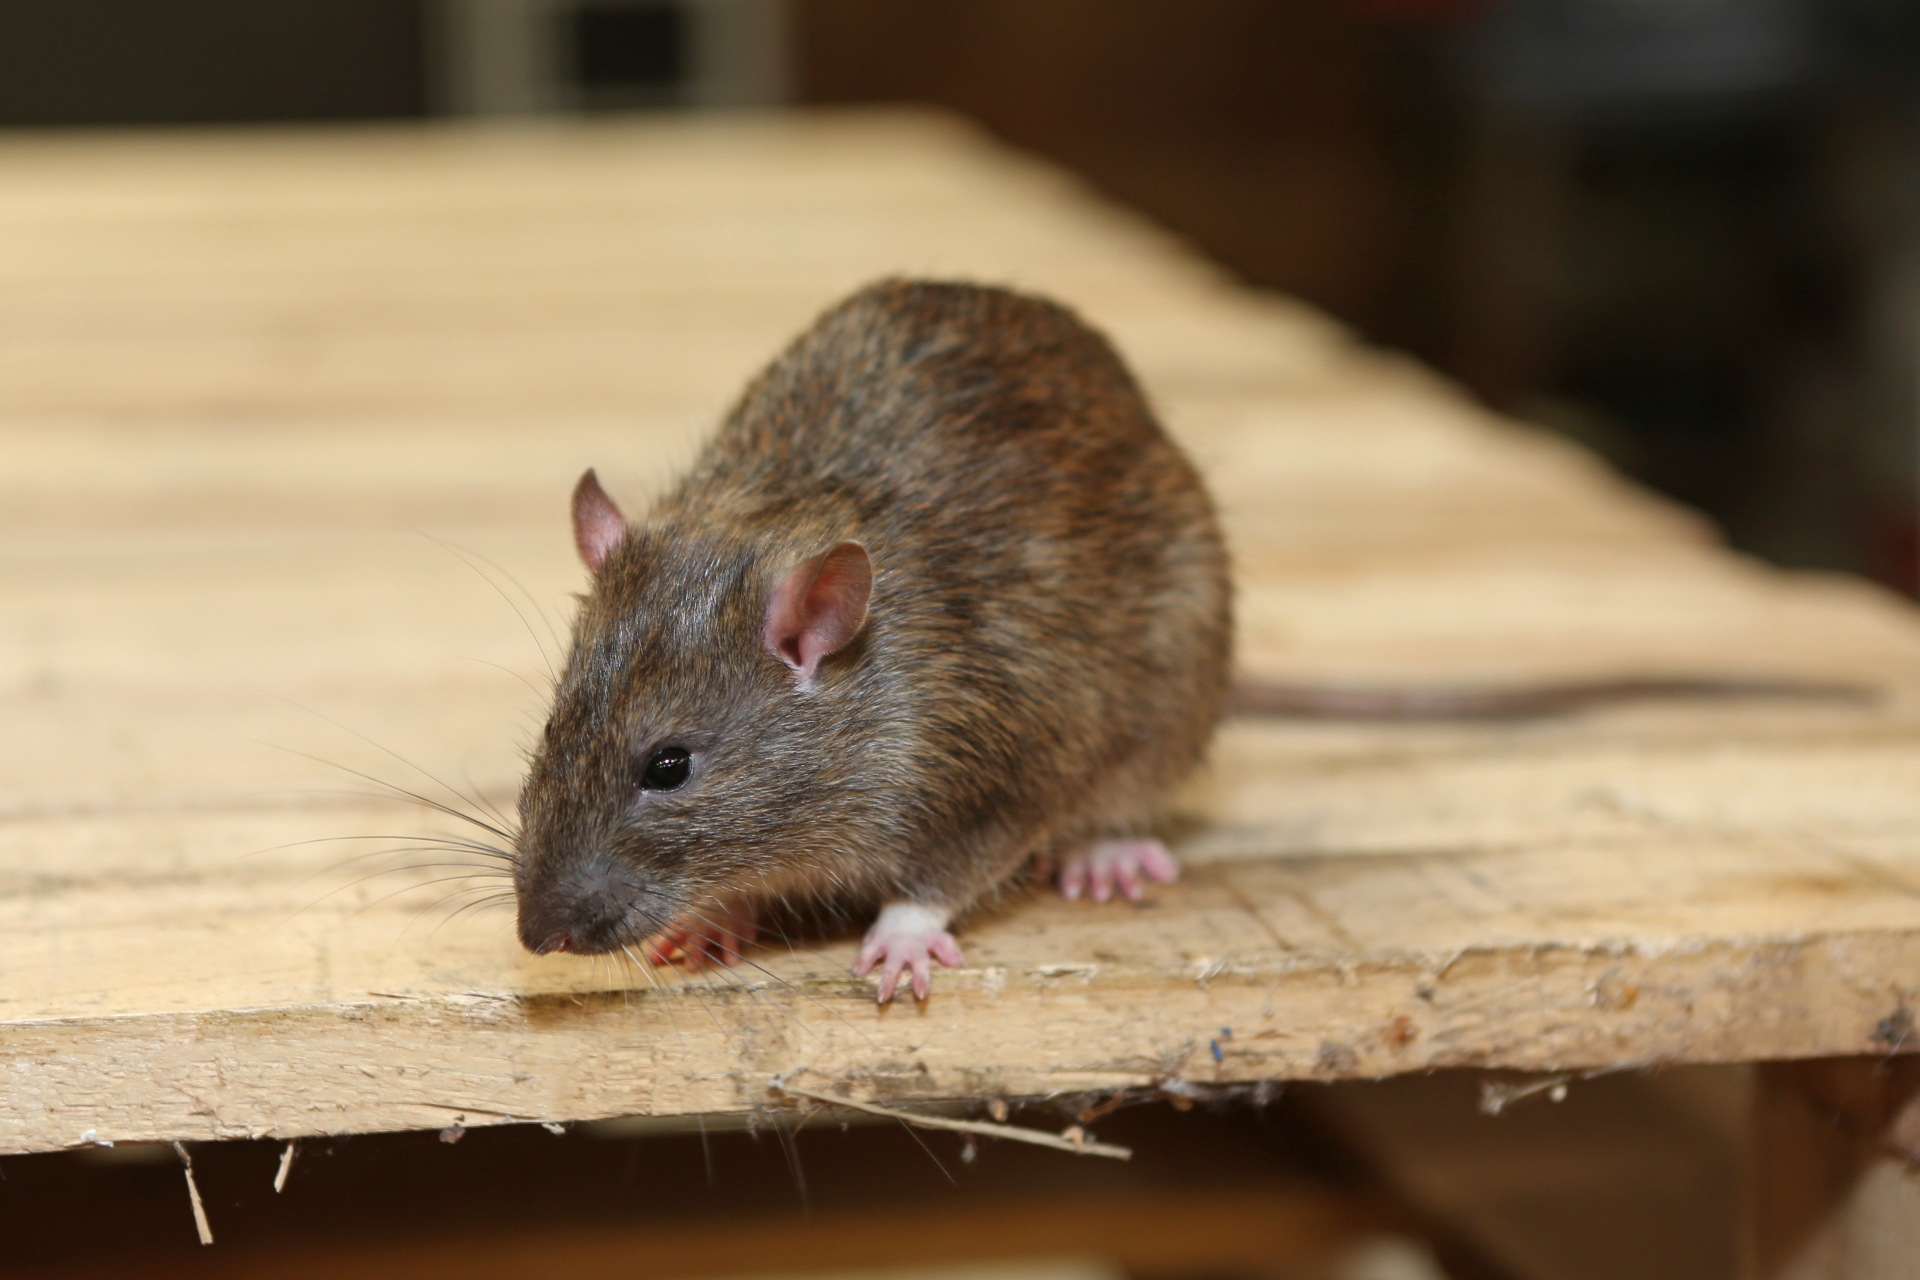 Rat extermination, Pest Control in Radlett, Shenley, WD7. Call Now 020 8166 9746